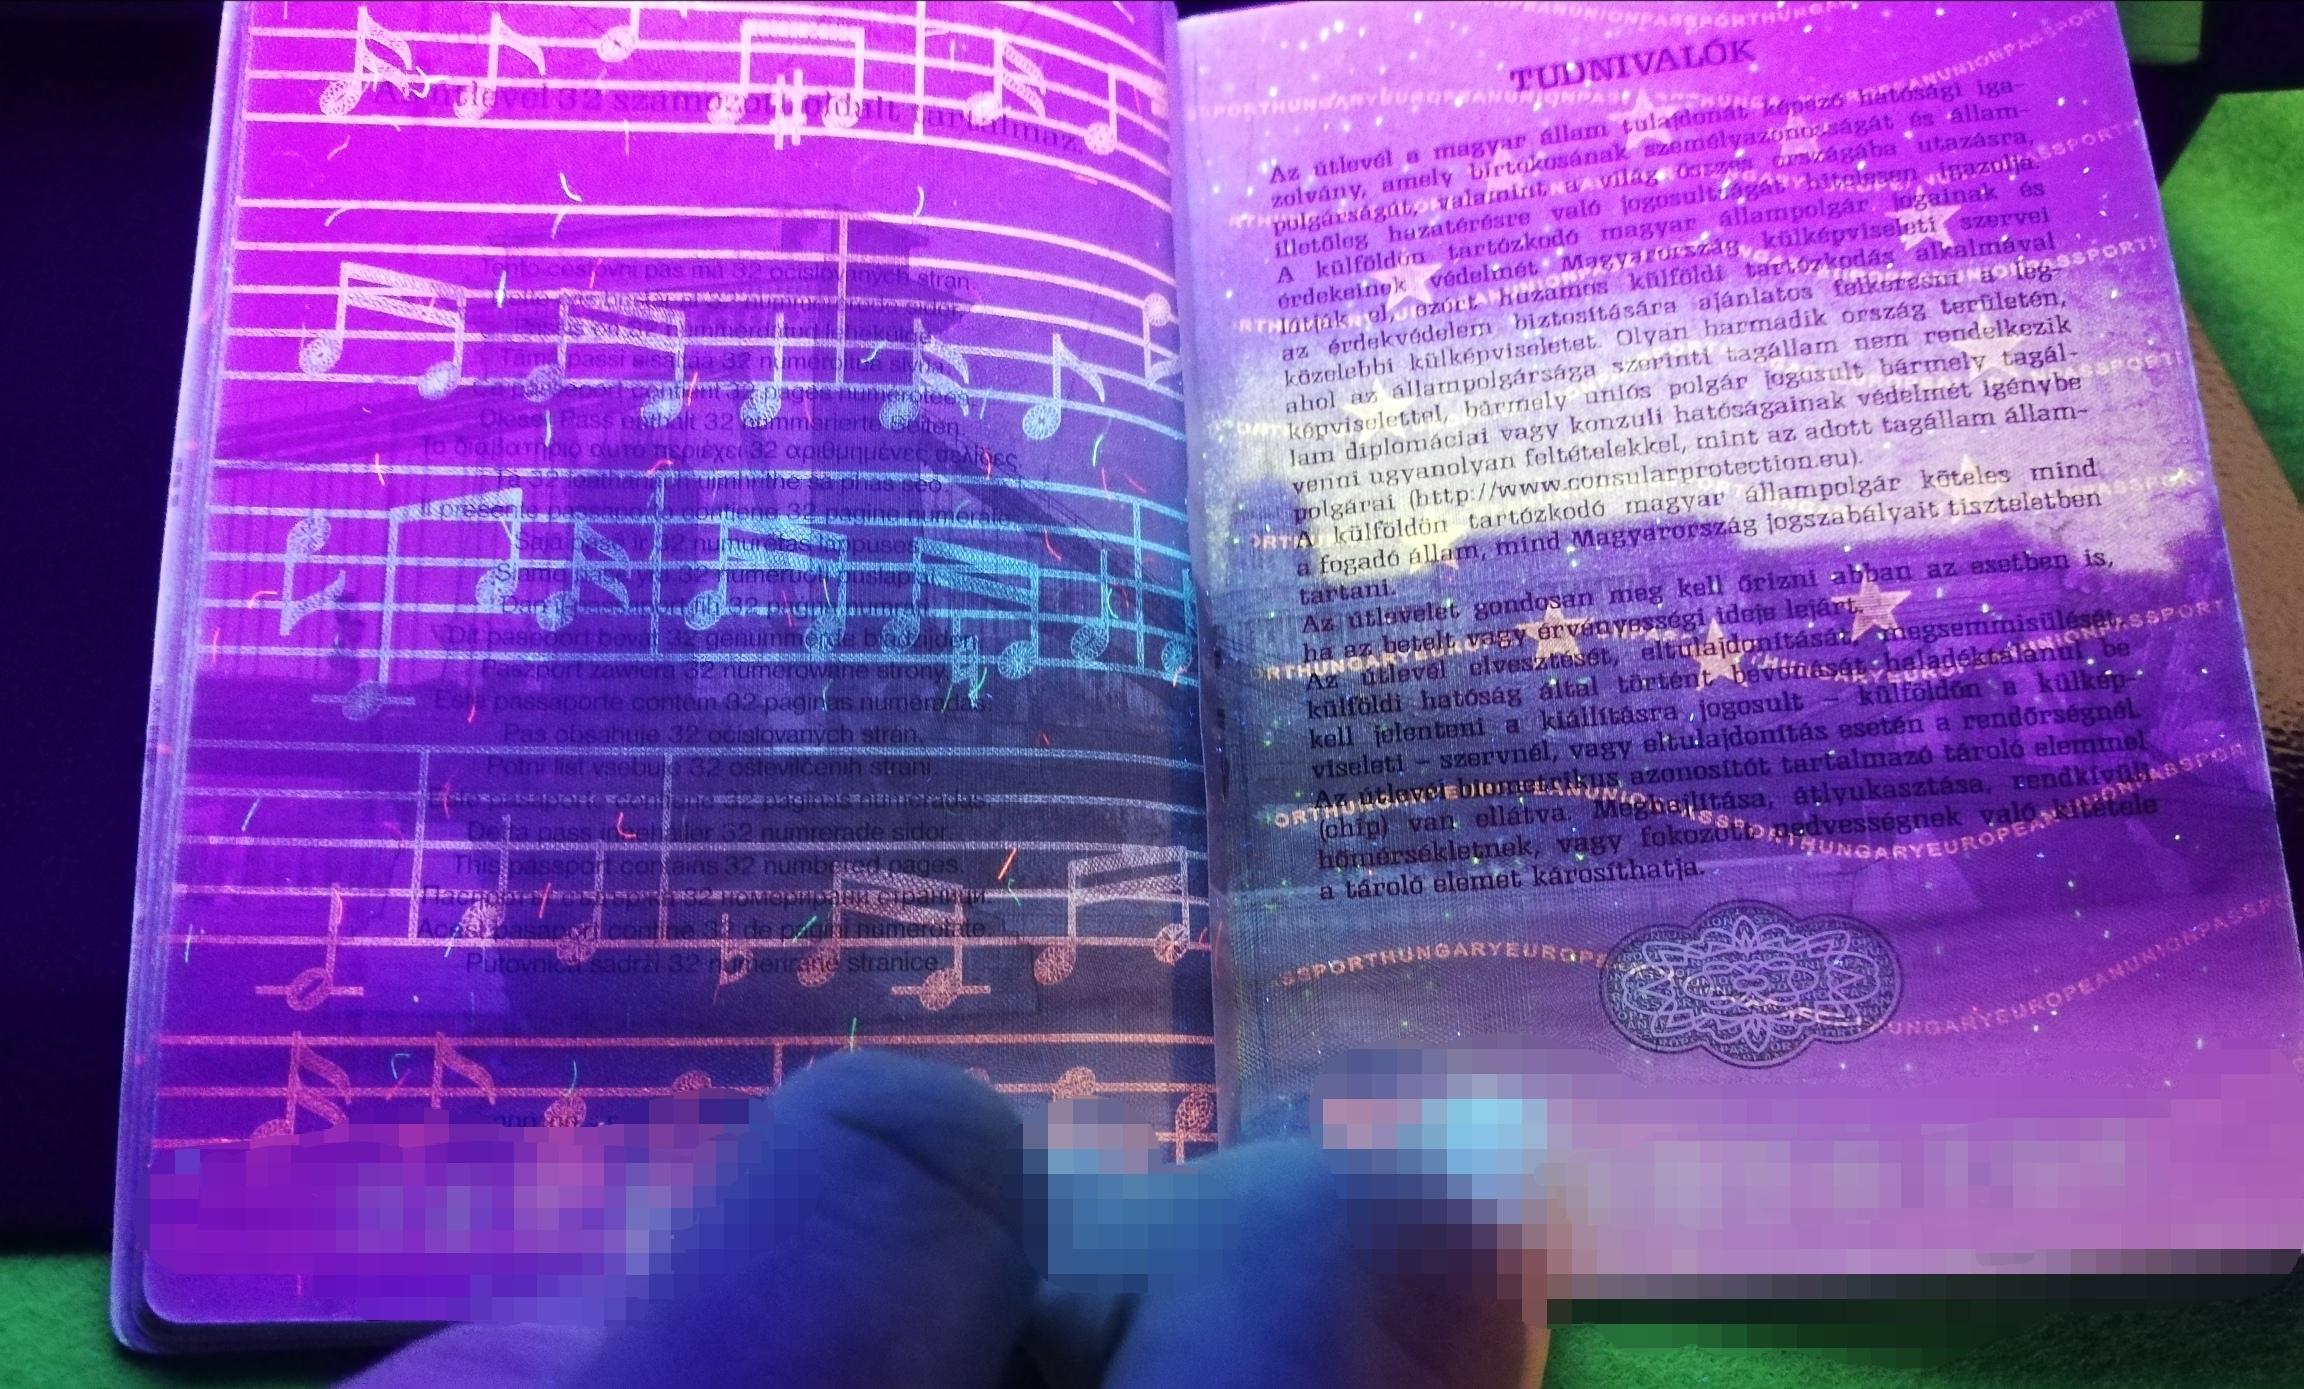 This passport's security features is the national anthem visible under a UV light.